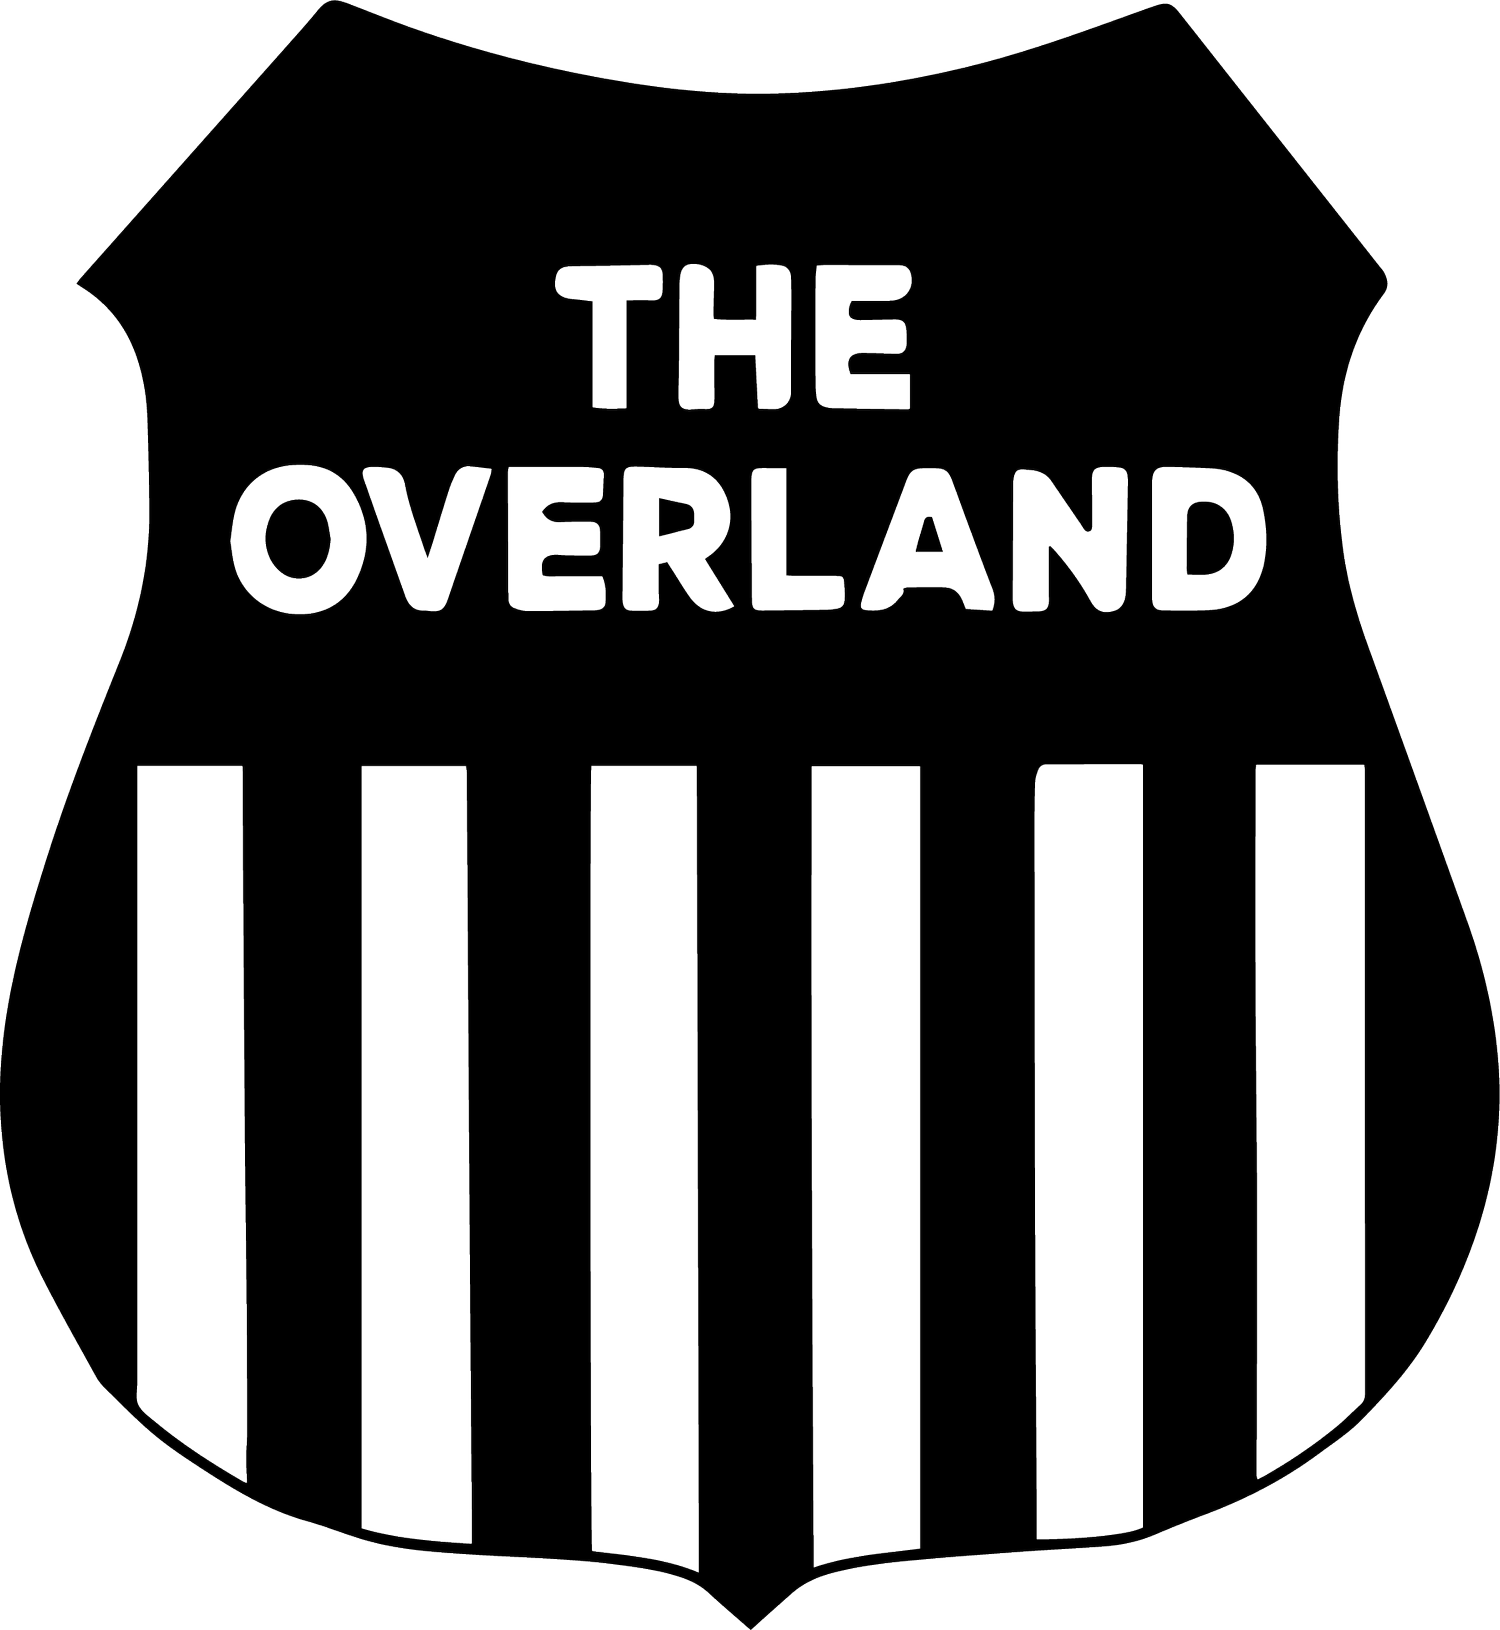 THE OVERLAND